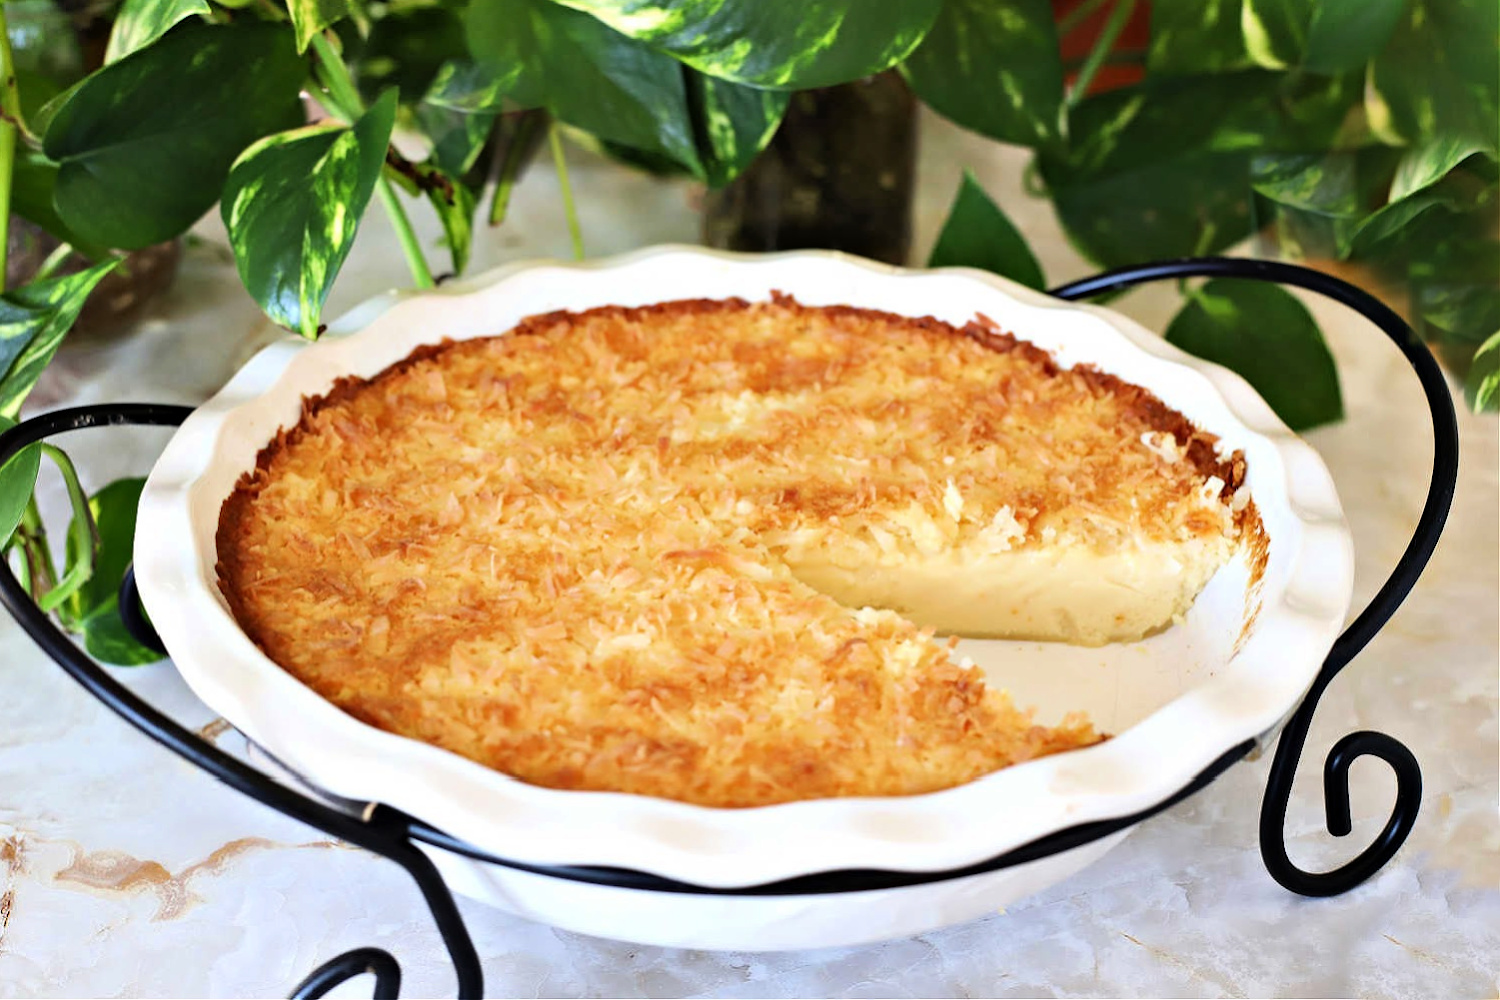 Super easy recipe that is delicious and always a favorite. Creamy Impossible Coconut Custard pie creates its own crust and takes just a few minutes to prepare. Add ingredients to a blender, pour into a pie pan, top with coconut and bake. It is that easy!